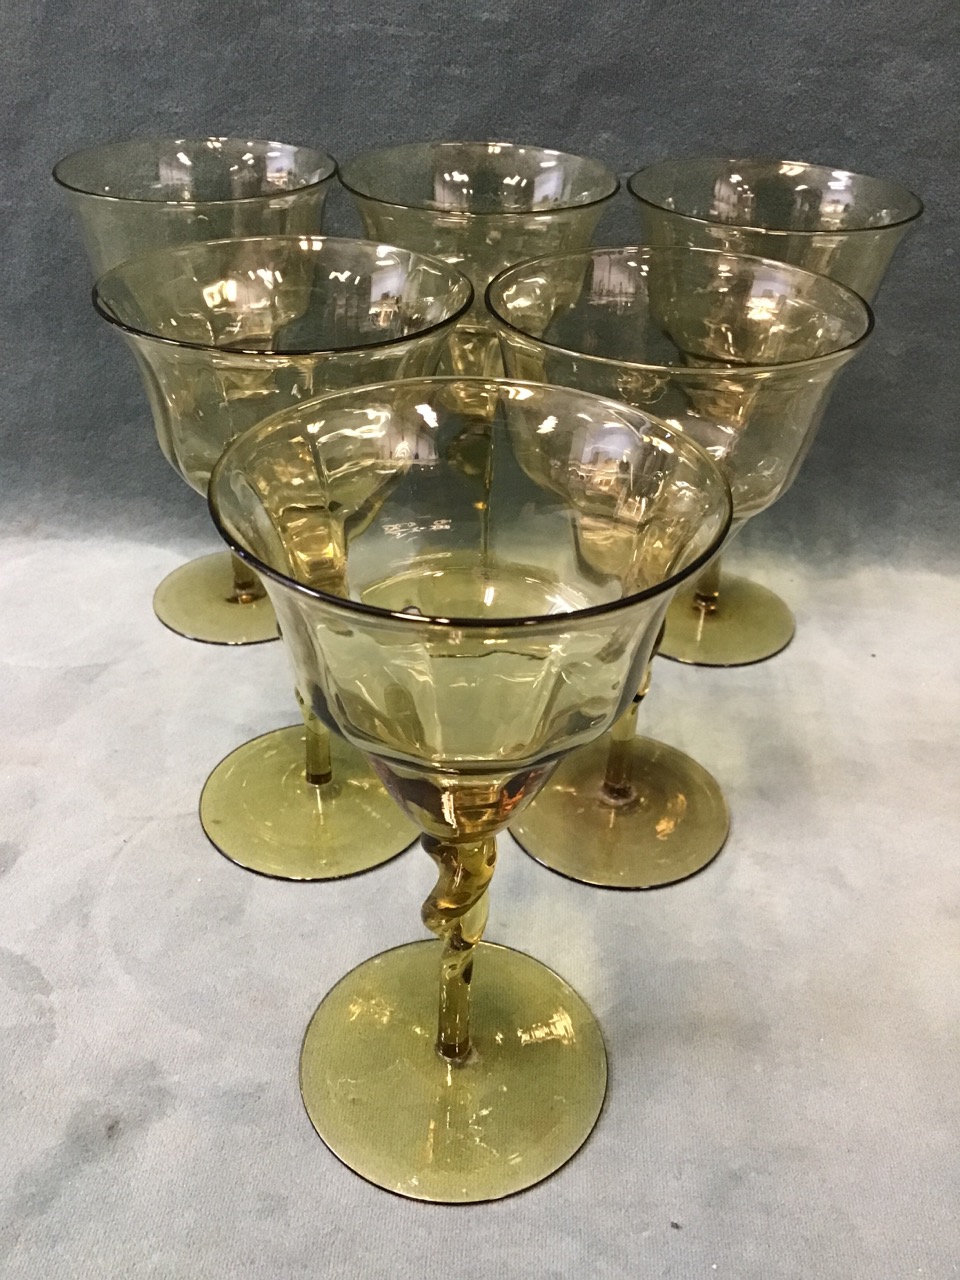 A set of six Victorian wine glasses by James Powell & Sons Whitefriars, design c.1860 attributed - Image 2 of 3